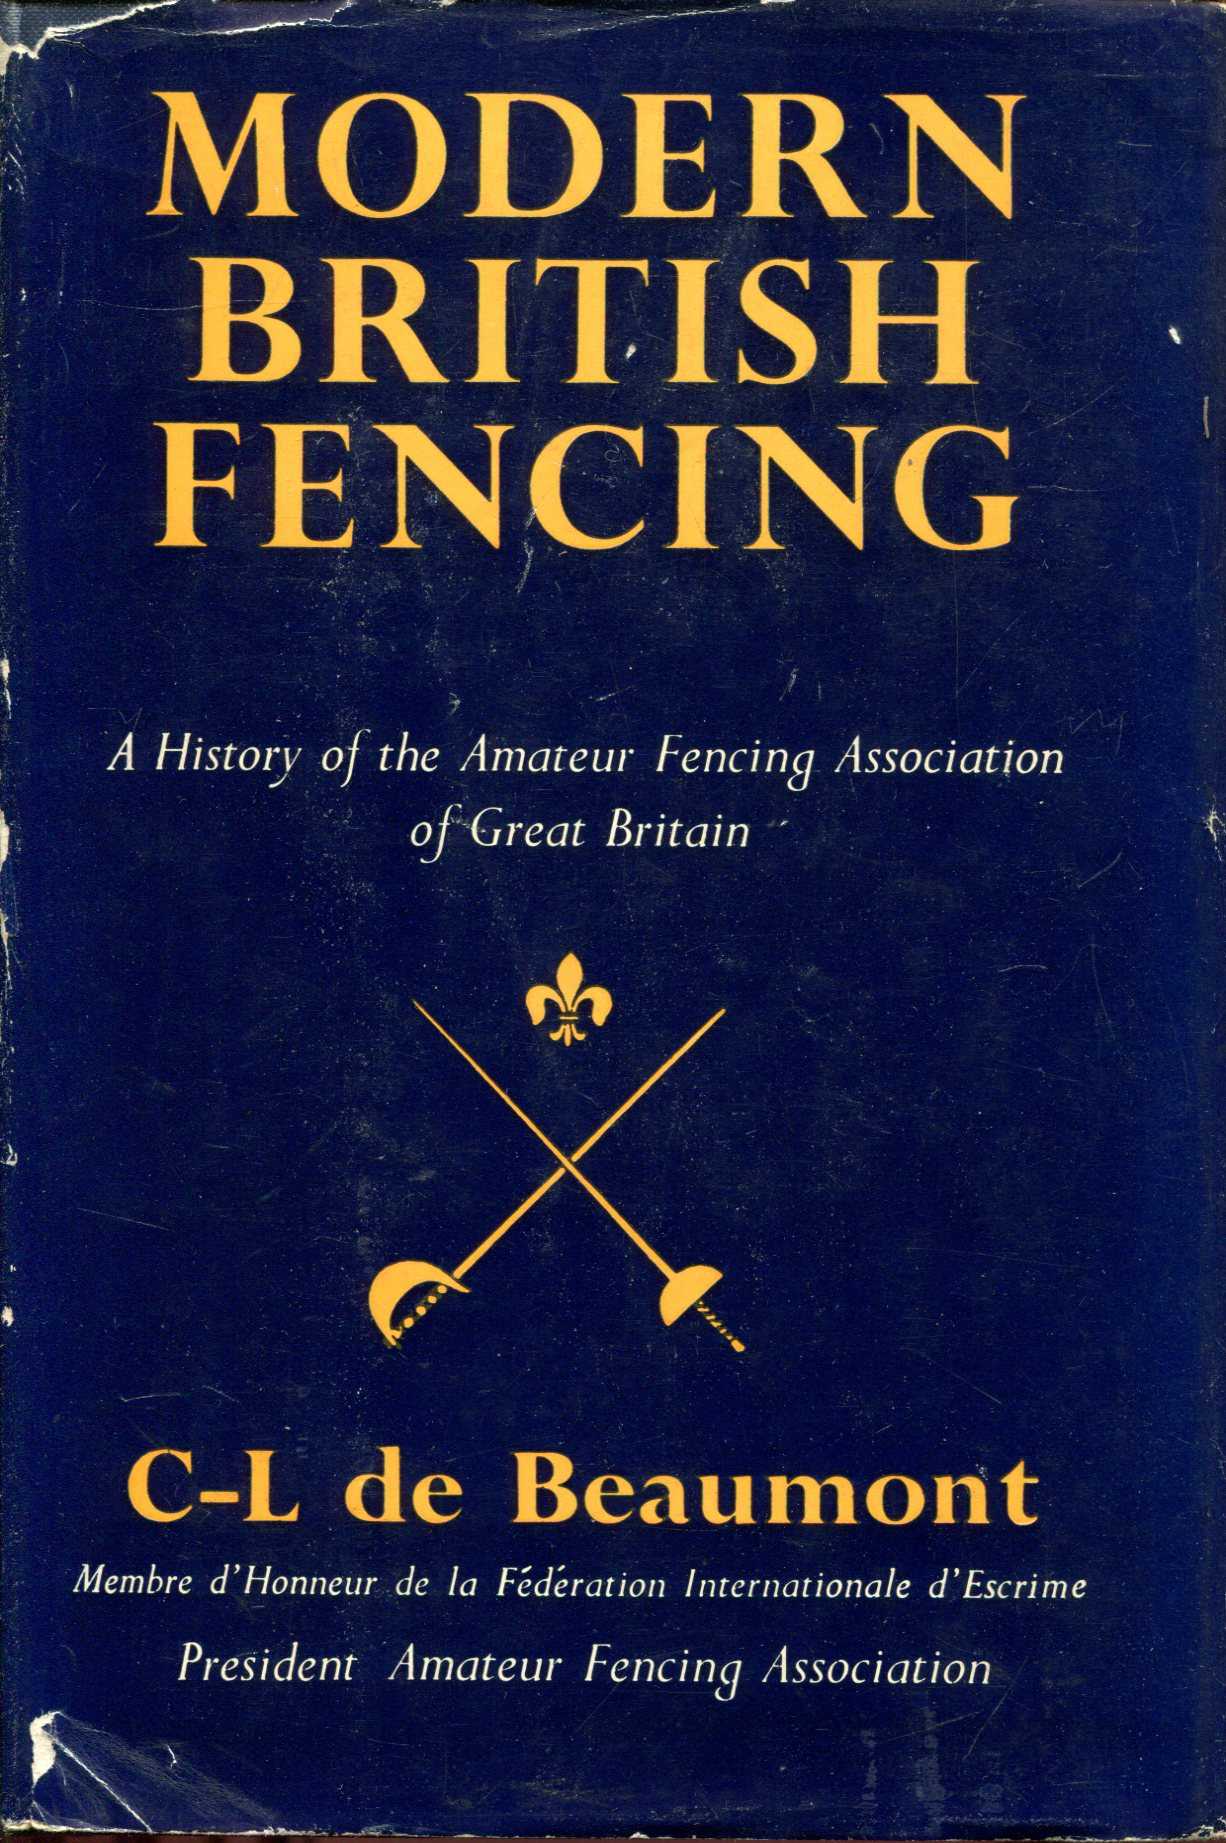 The Science Of Fencing by William M. Gaugler